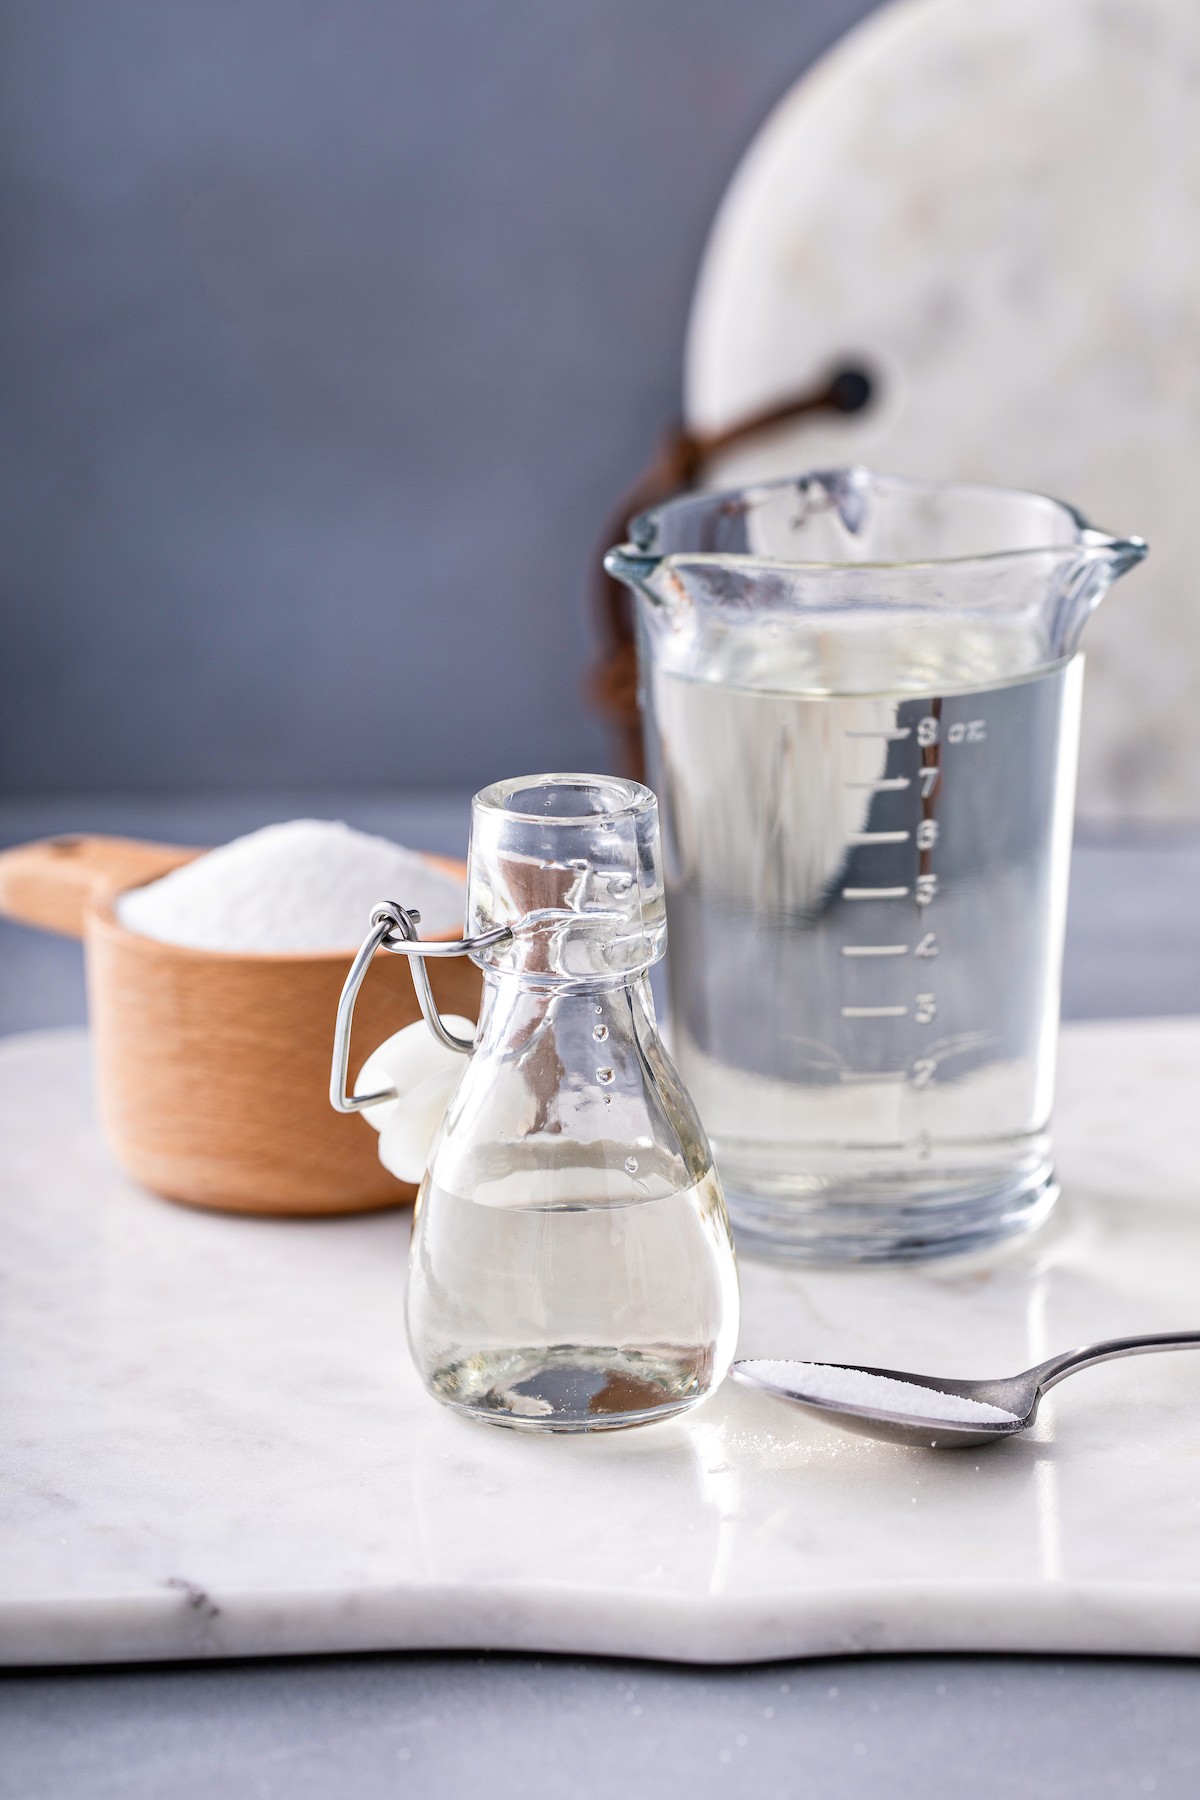 A measuring cup of clear liquid, and a small glass jar with a stopper.